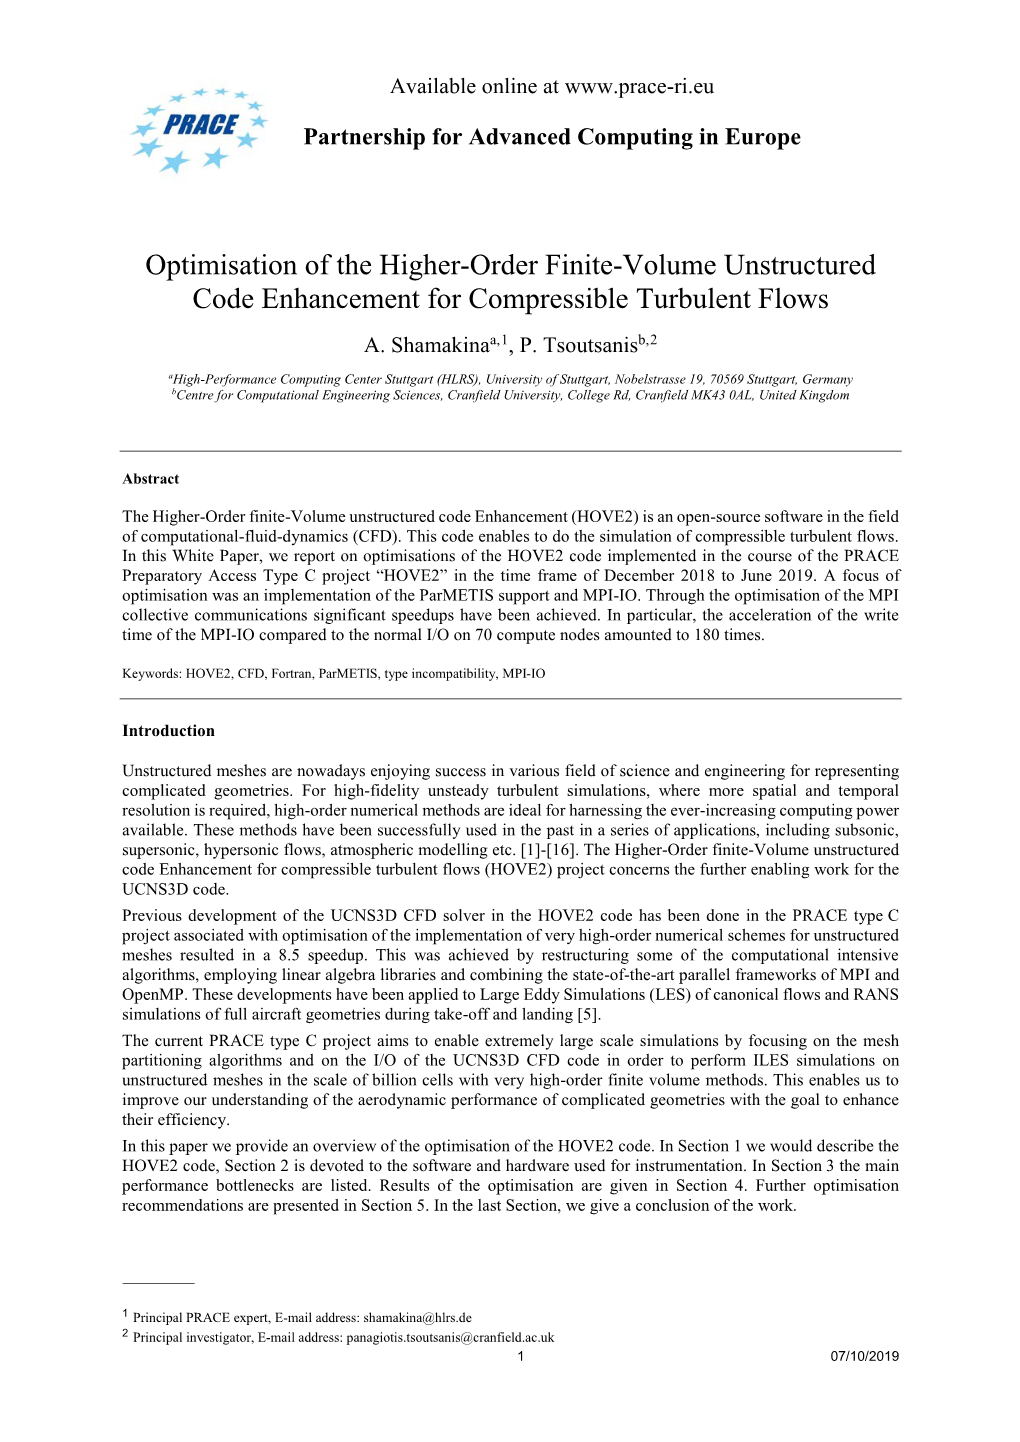 Optimisation of the Higher-Order Finite-Volume Unstructured Code Enhancement for Compressible Turbulent Flows A